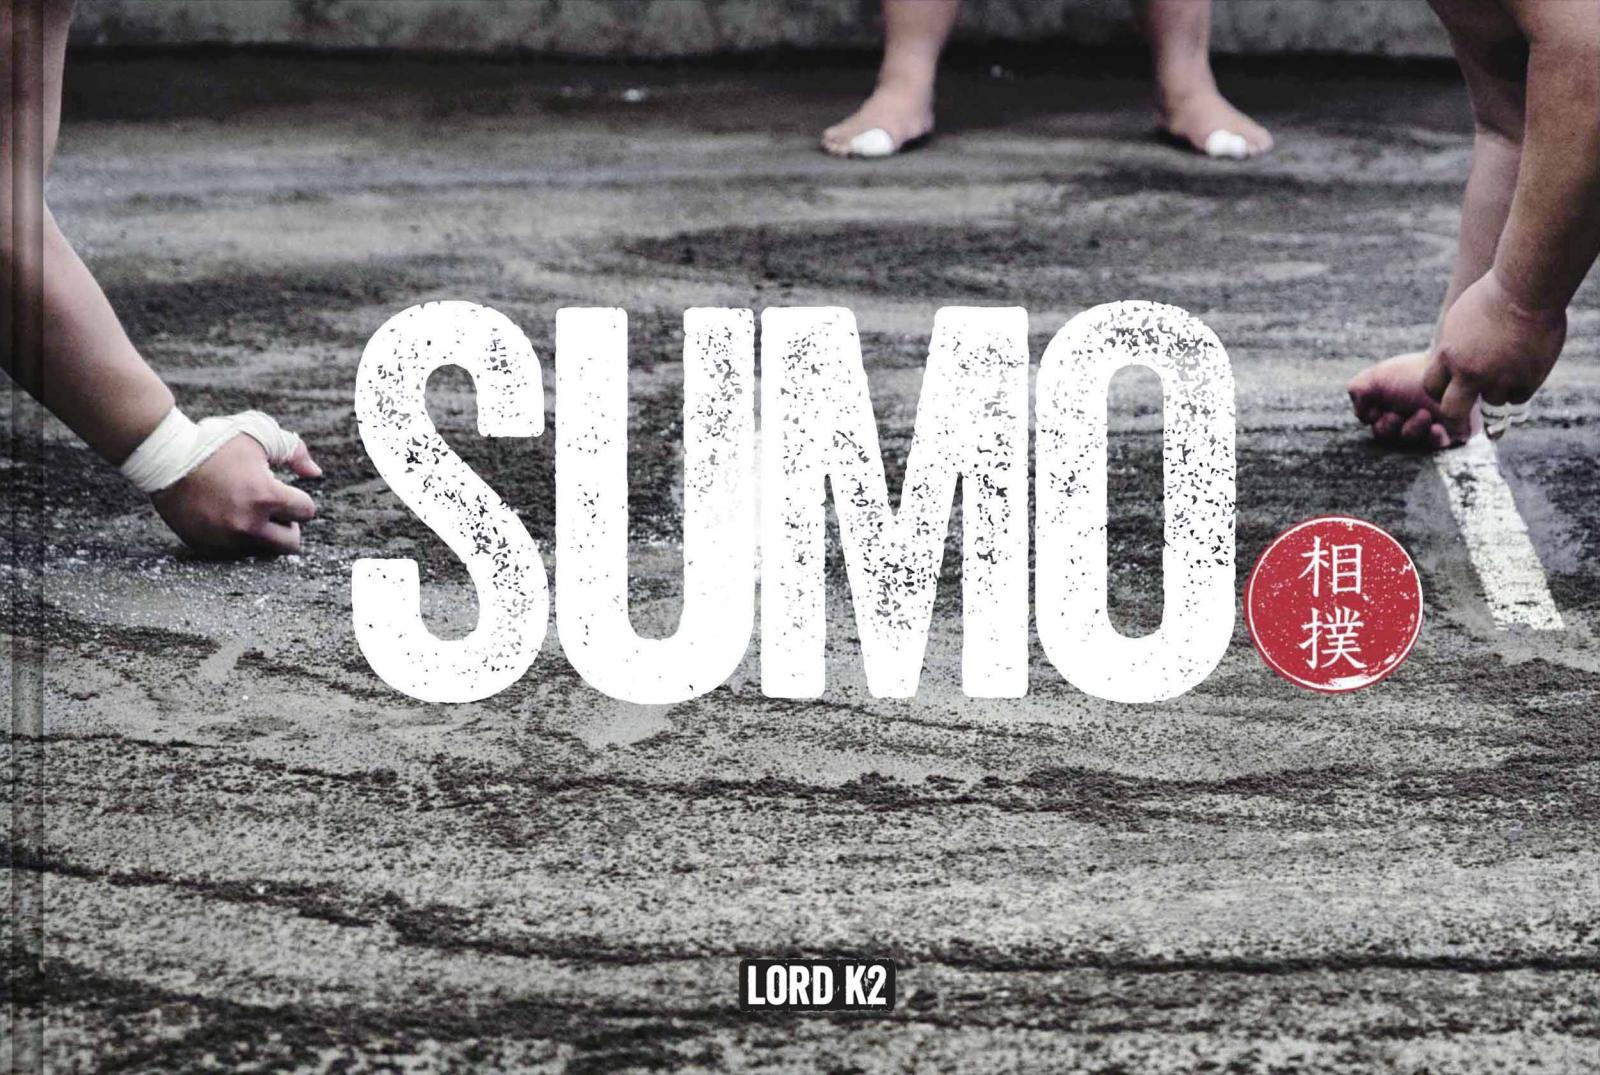 Thumbnail of Announcing launch date of SUMO, the first book authorized by the Sumo Association